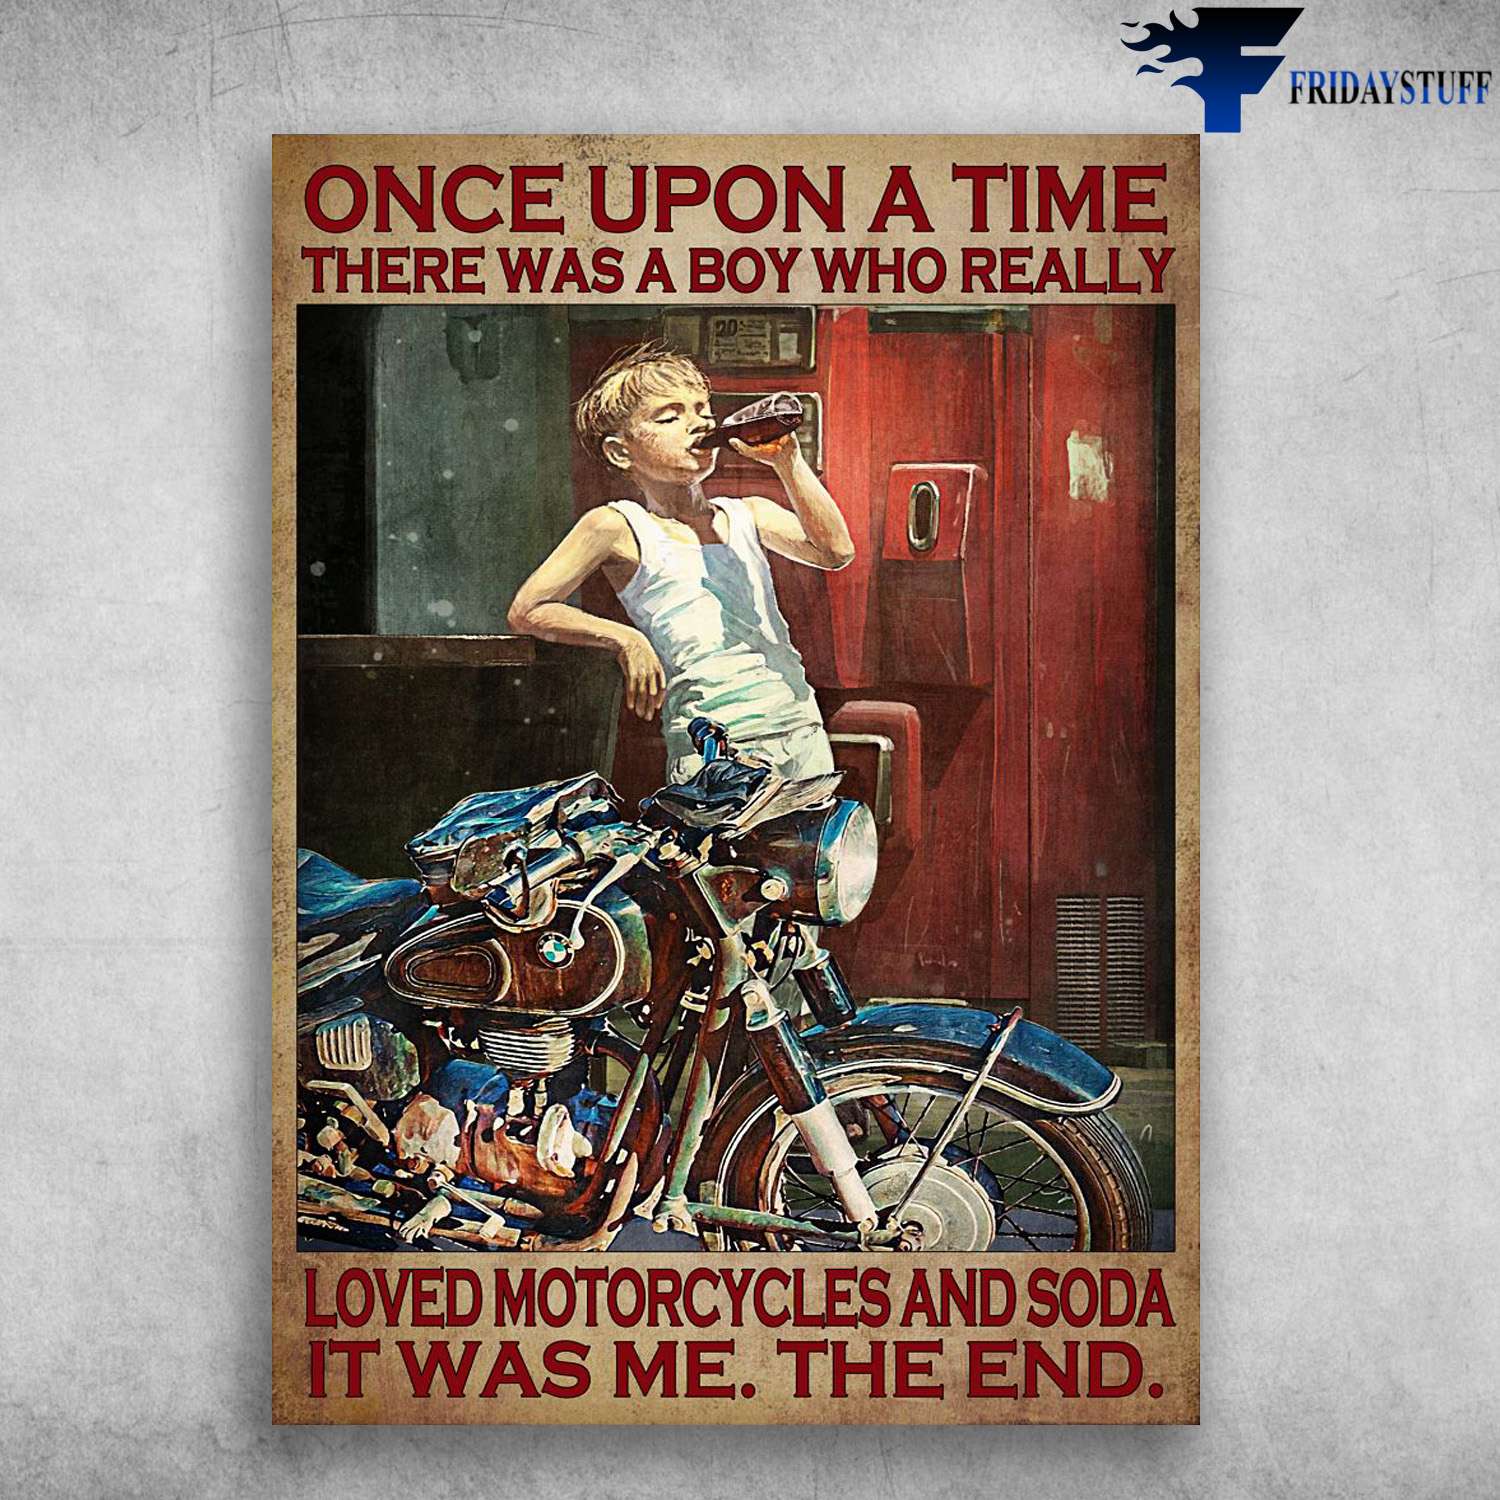 Motorcycle And Soda Boy - Once Upon A Time, There Was A Boy, Who Really Loved Motorcycle And Soda, It Was Me, The End